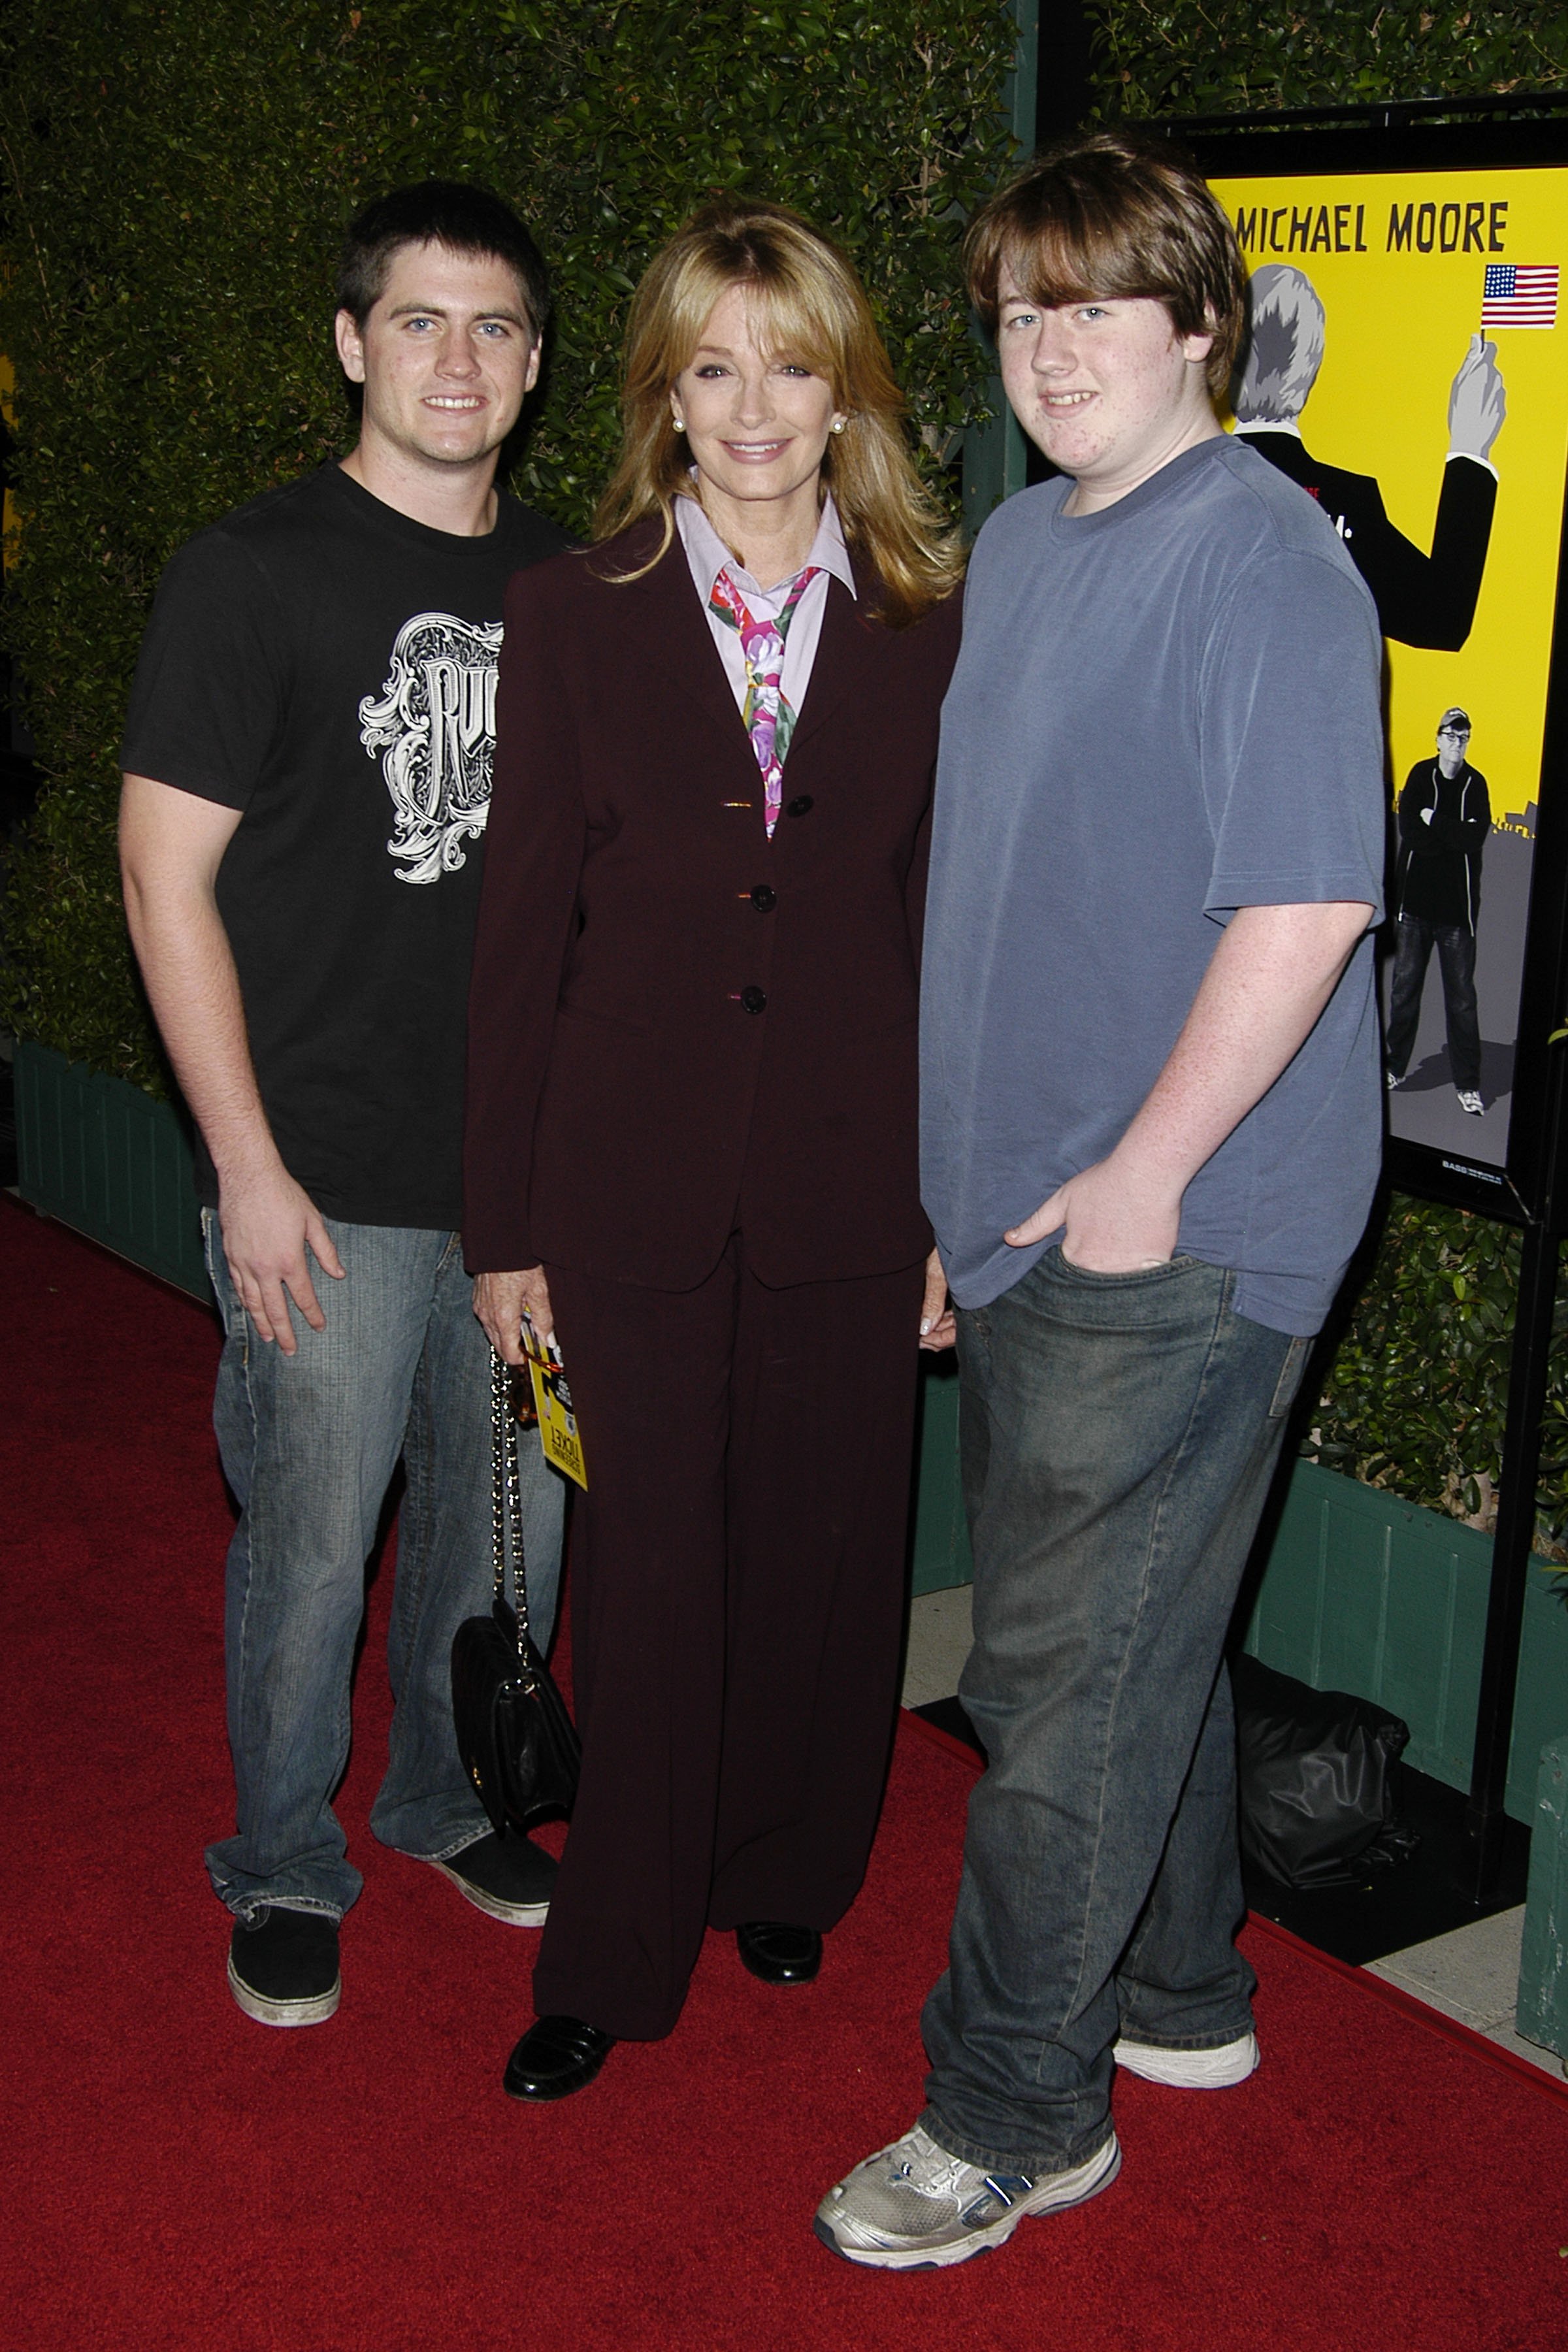 (L-R) David Sohmer, Dierdre Hall and Tully Sohmer attend the Los Angeles Premiere of "Capitalism: A Love Story" at The Samual Goldwyn Theatre on September 15, 2009 in Beverly Hills, California | Source: Getty Images